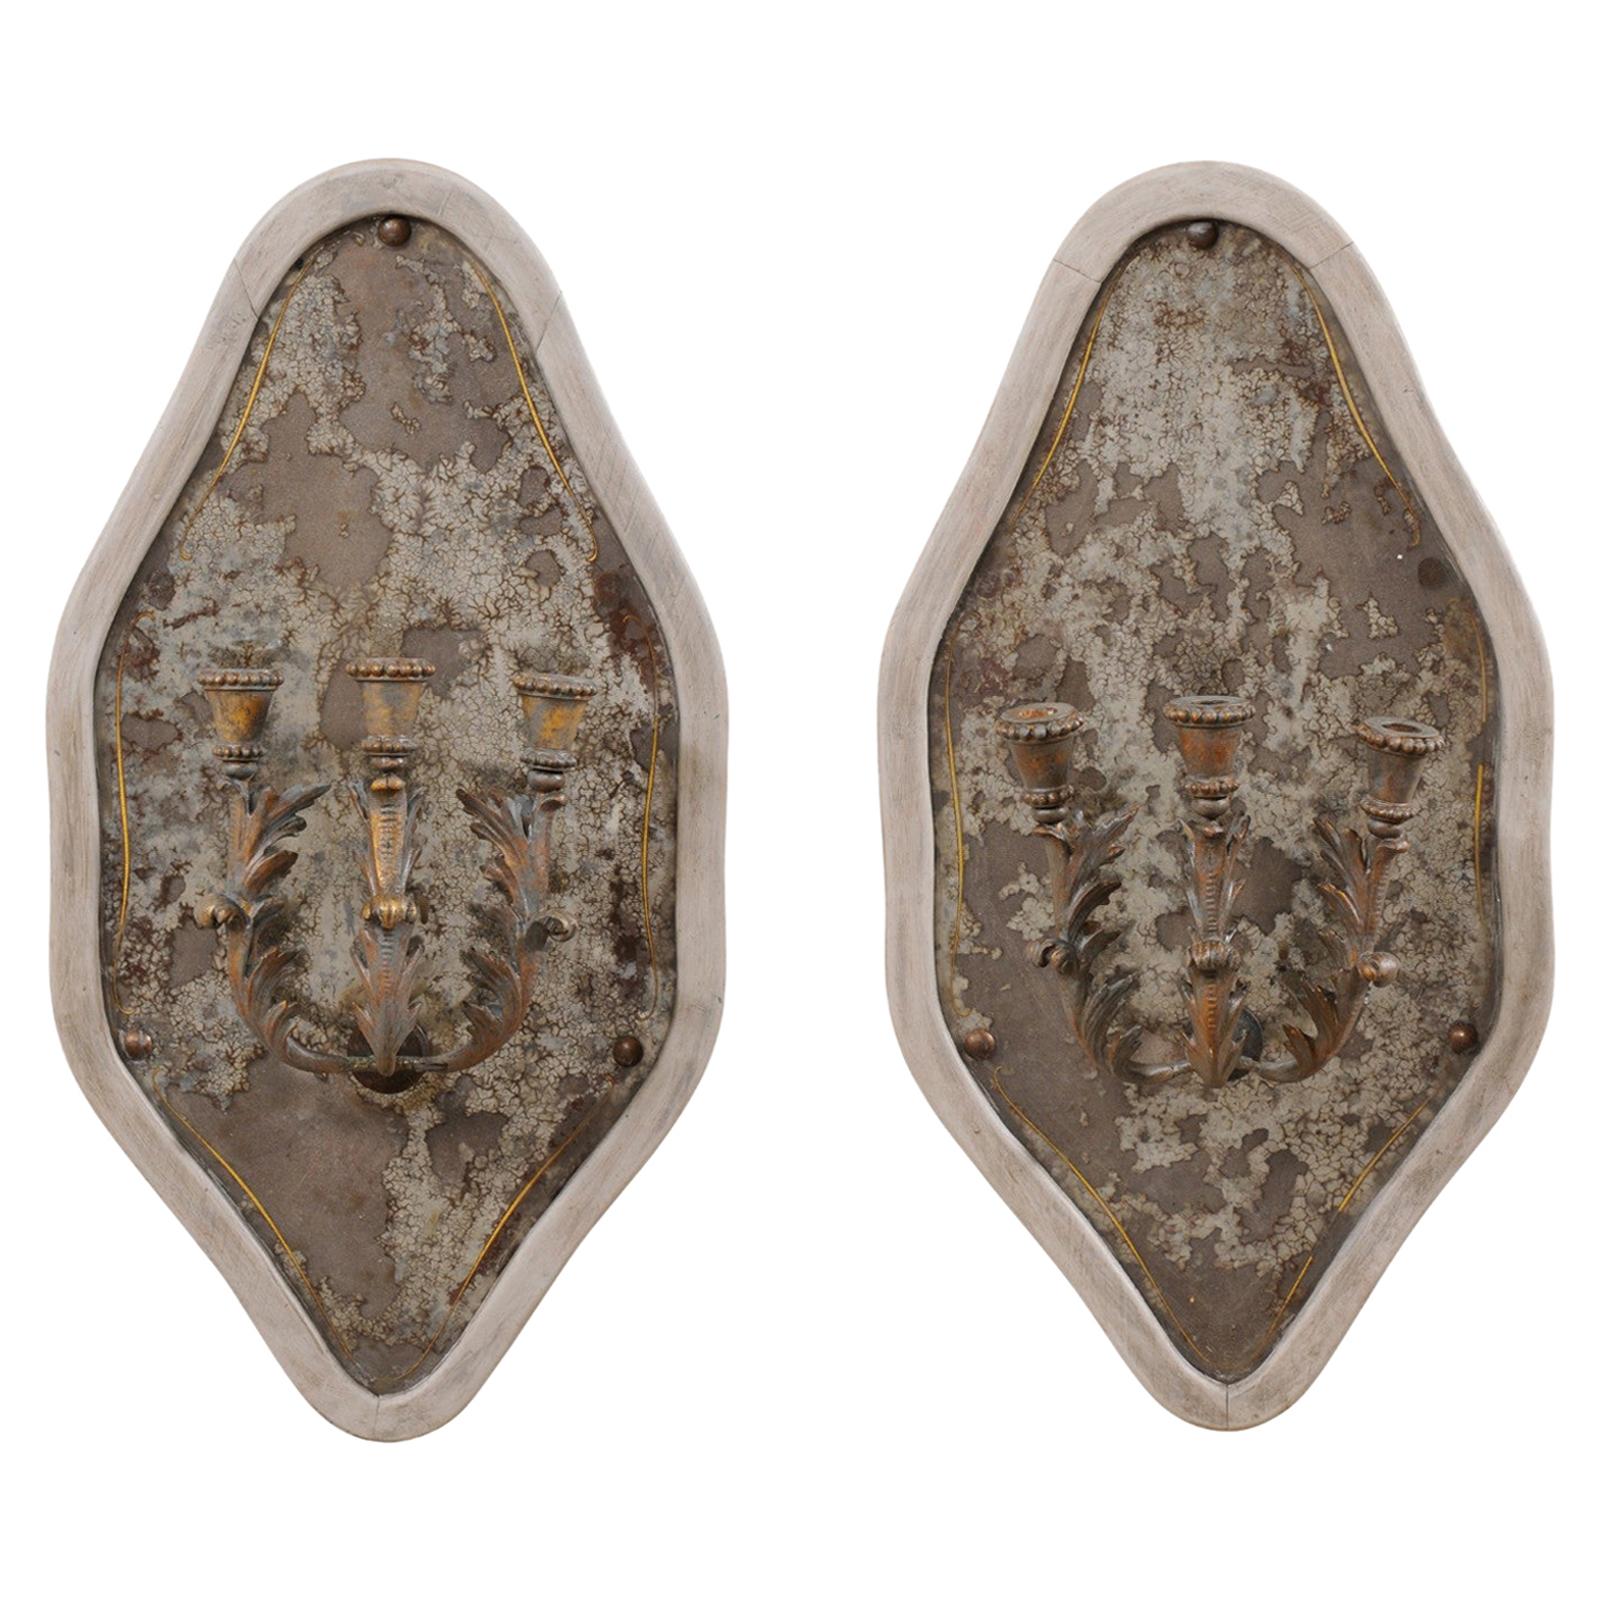 French Pair of Antiqued Mirrored Wall Plaques with Three-Light Candle Sconces